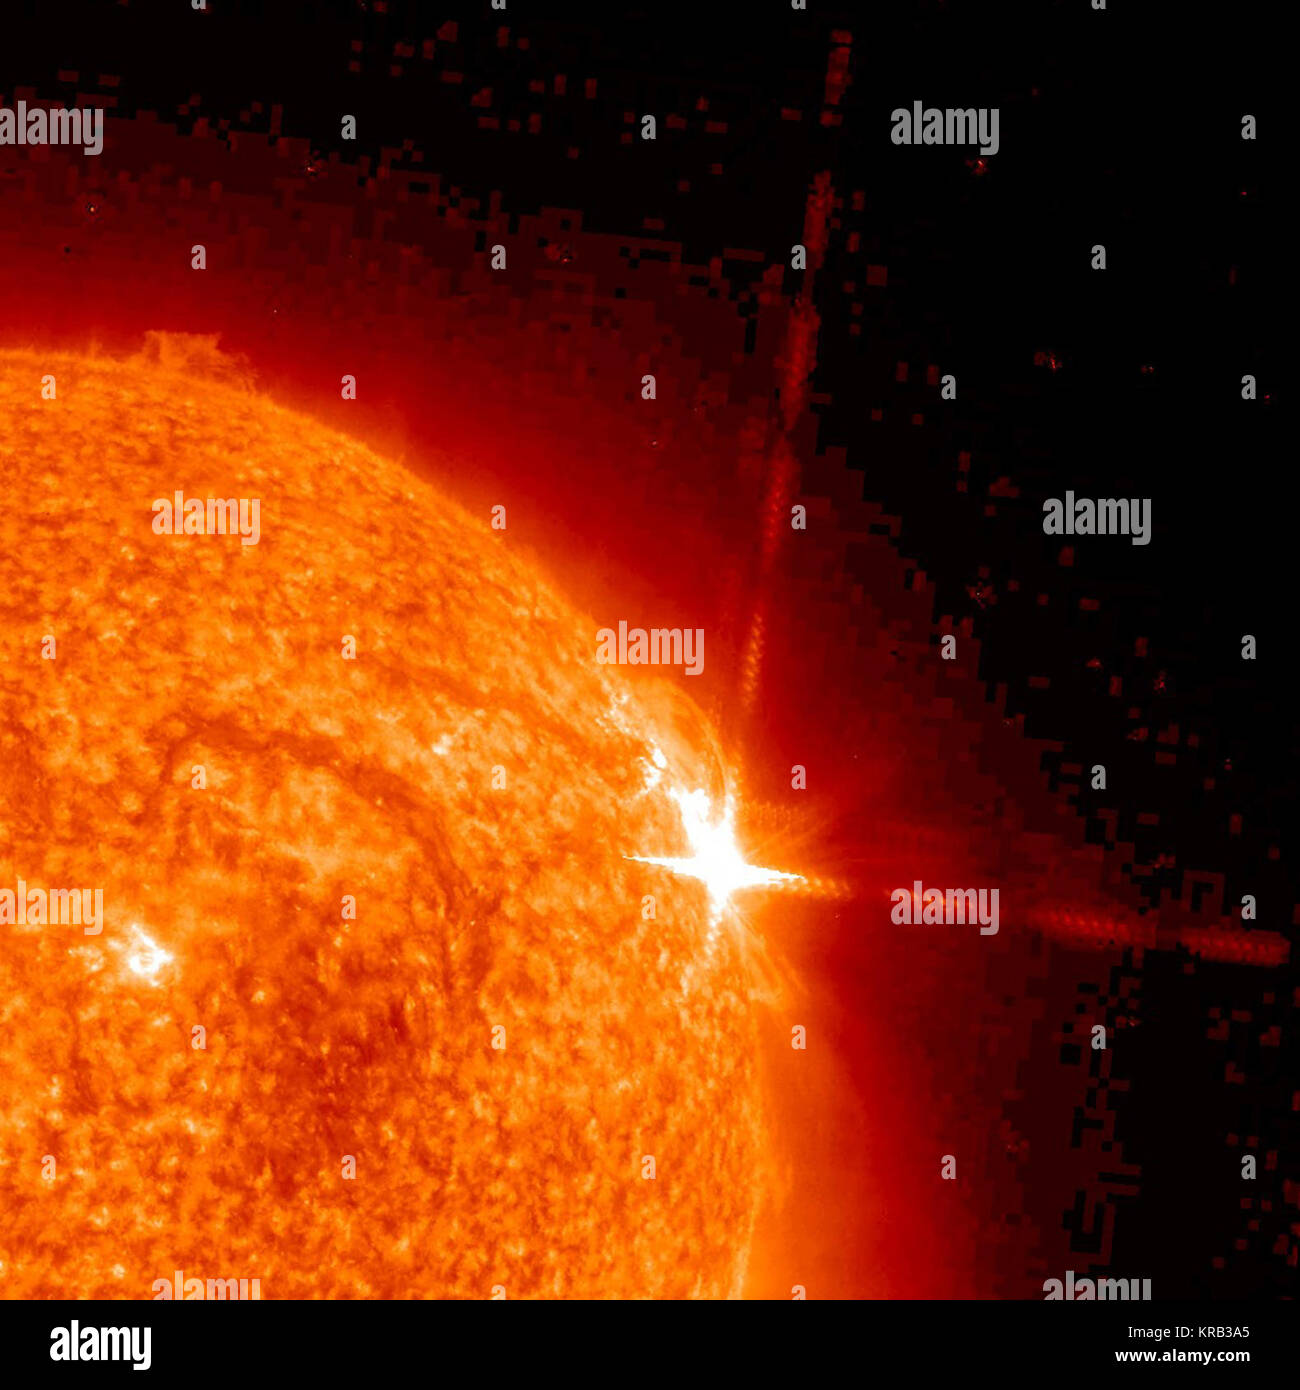 Over the course of three days (Mar. 5-7, 2012), a single, large active region blasted out over a dozen solar flares. STEREO (Behind) spacecraft caught the action in extreme UV light. Saving the best for last, it erupted with an X5 flare (X is the largest category) and a storm of charged particles as part of a coronal mass ejection. We'll be tracking this region around the far side of the Sun with STEREO and be ready if the Sun's rotation carries the existing activity back into view around March 28th. The particles near the end of the clip look like a mass of squiggling amoeba, a distortion cau Stock Photo